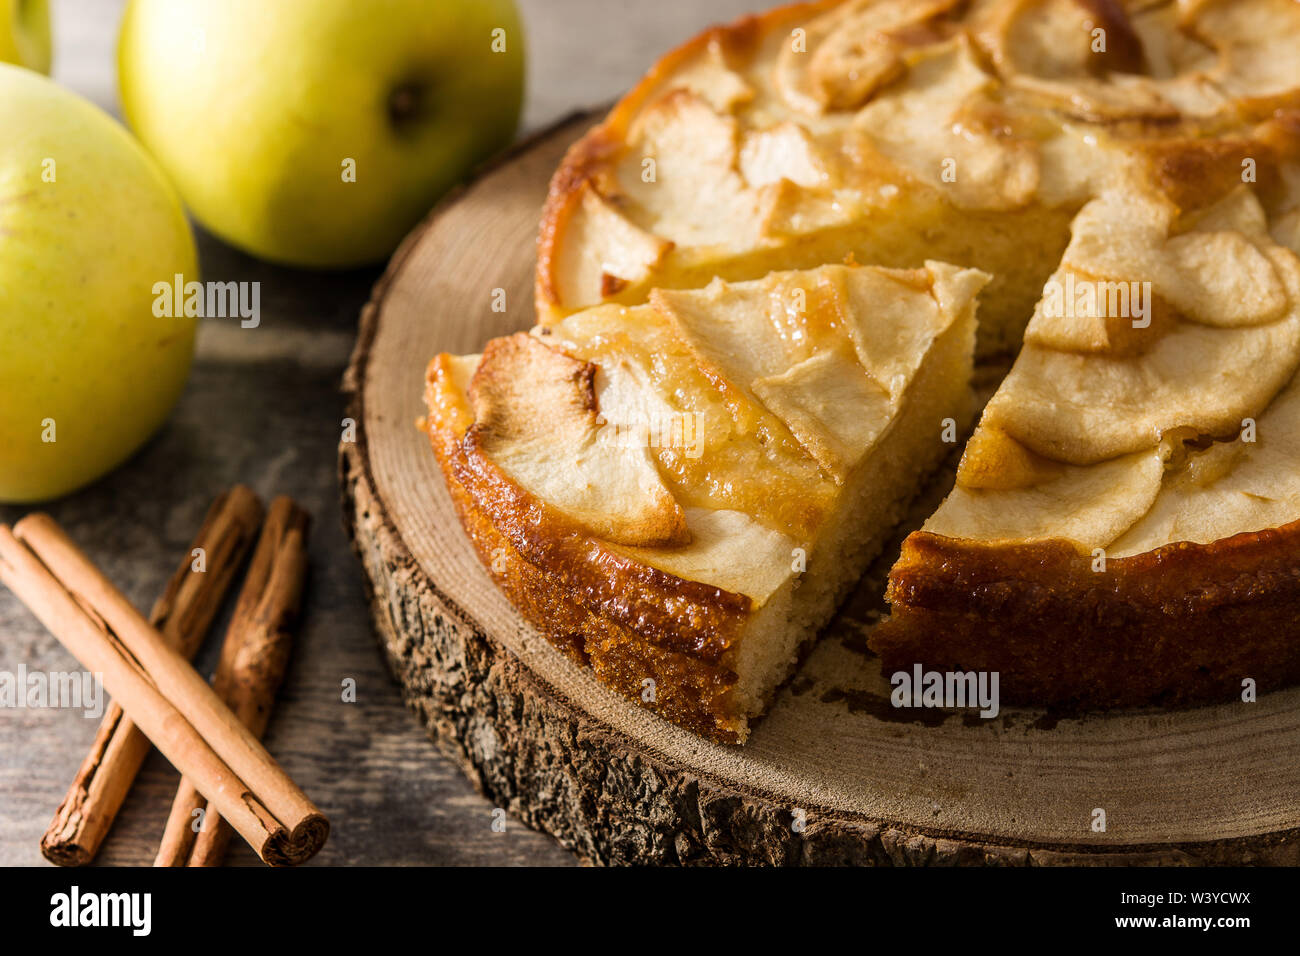 Homemade apple pie on wooden table. Close up Stock Photo